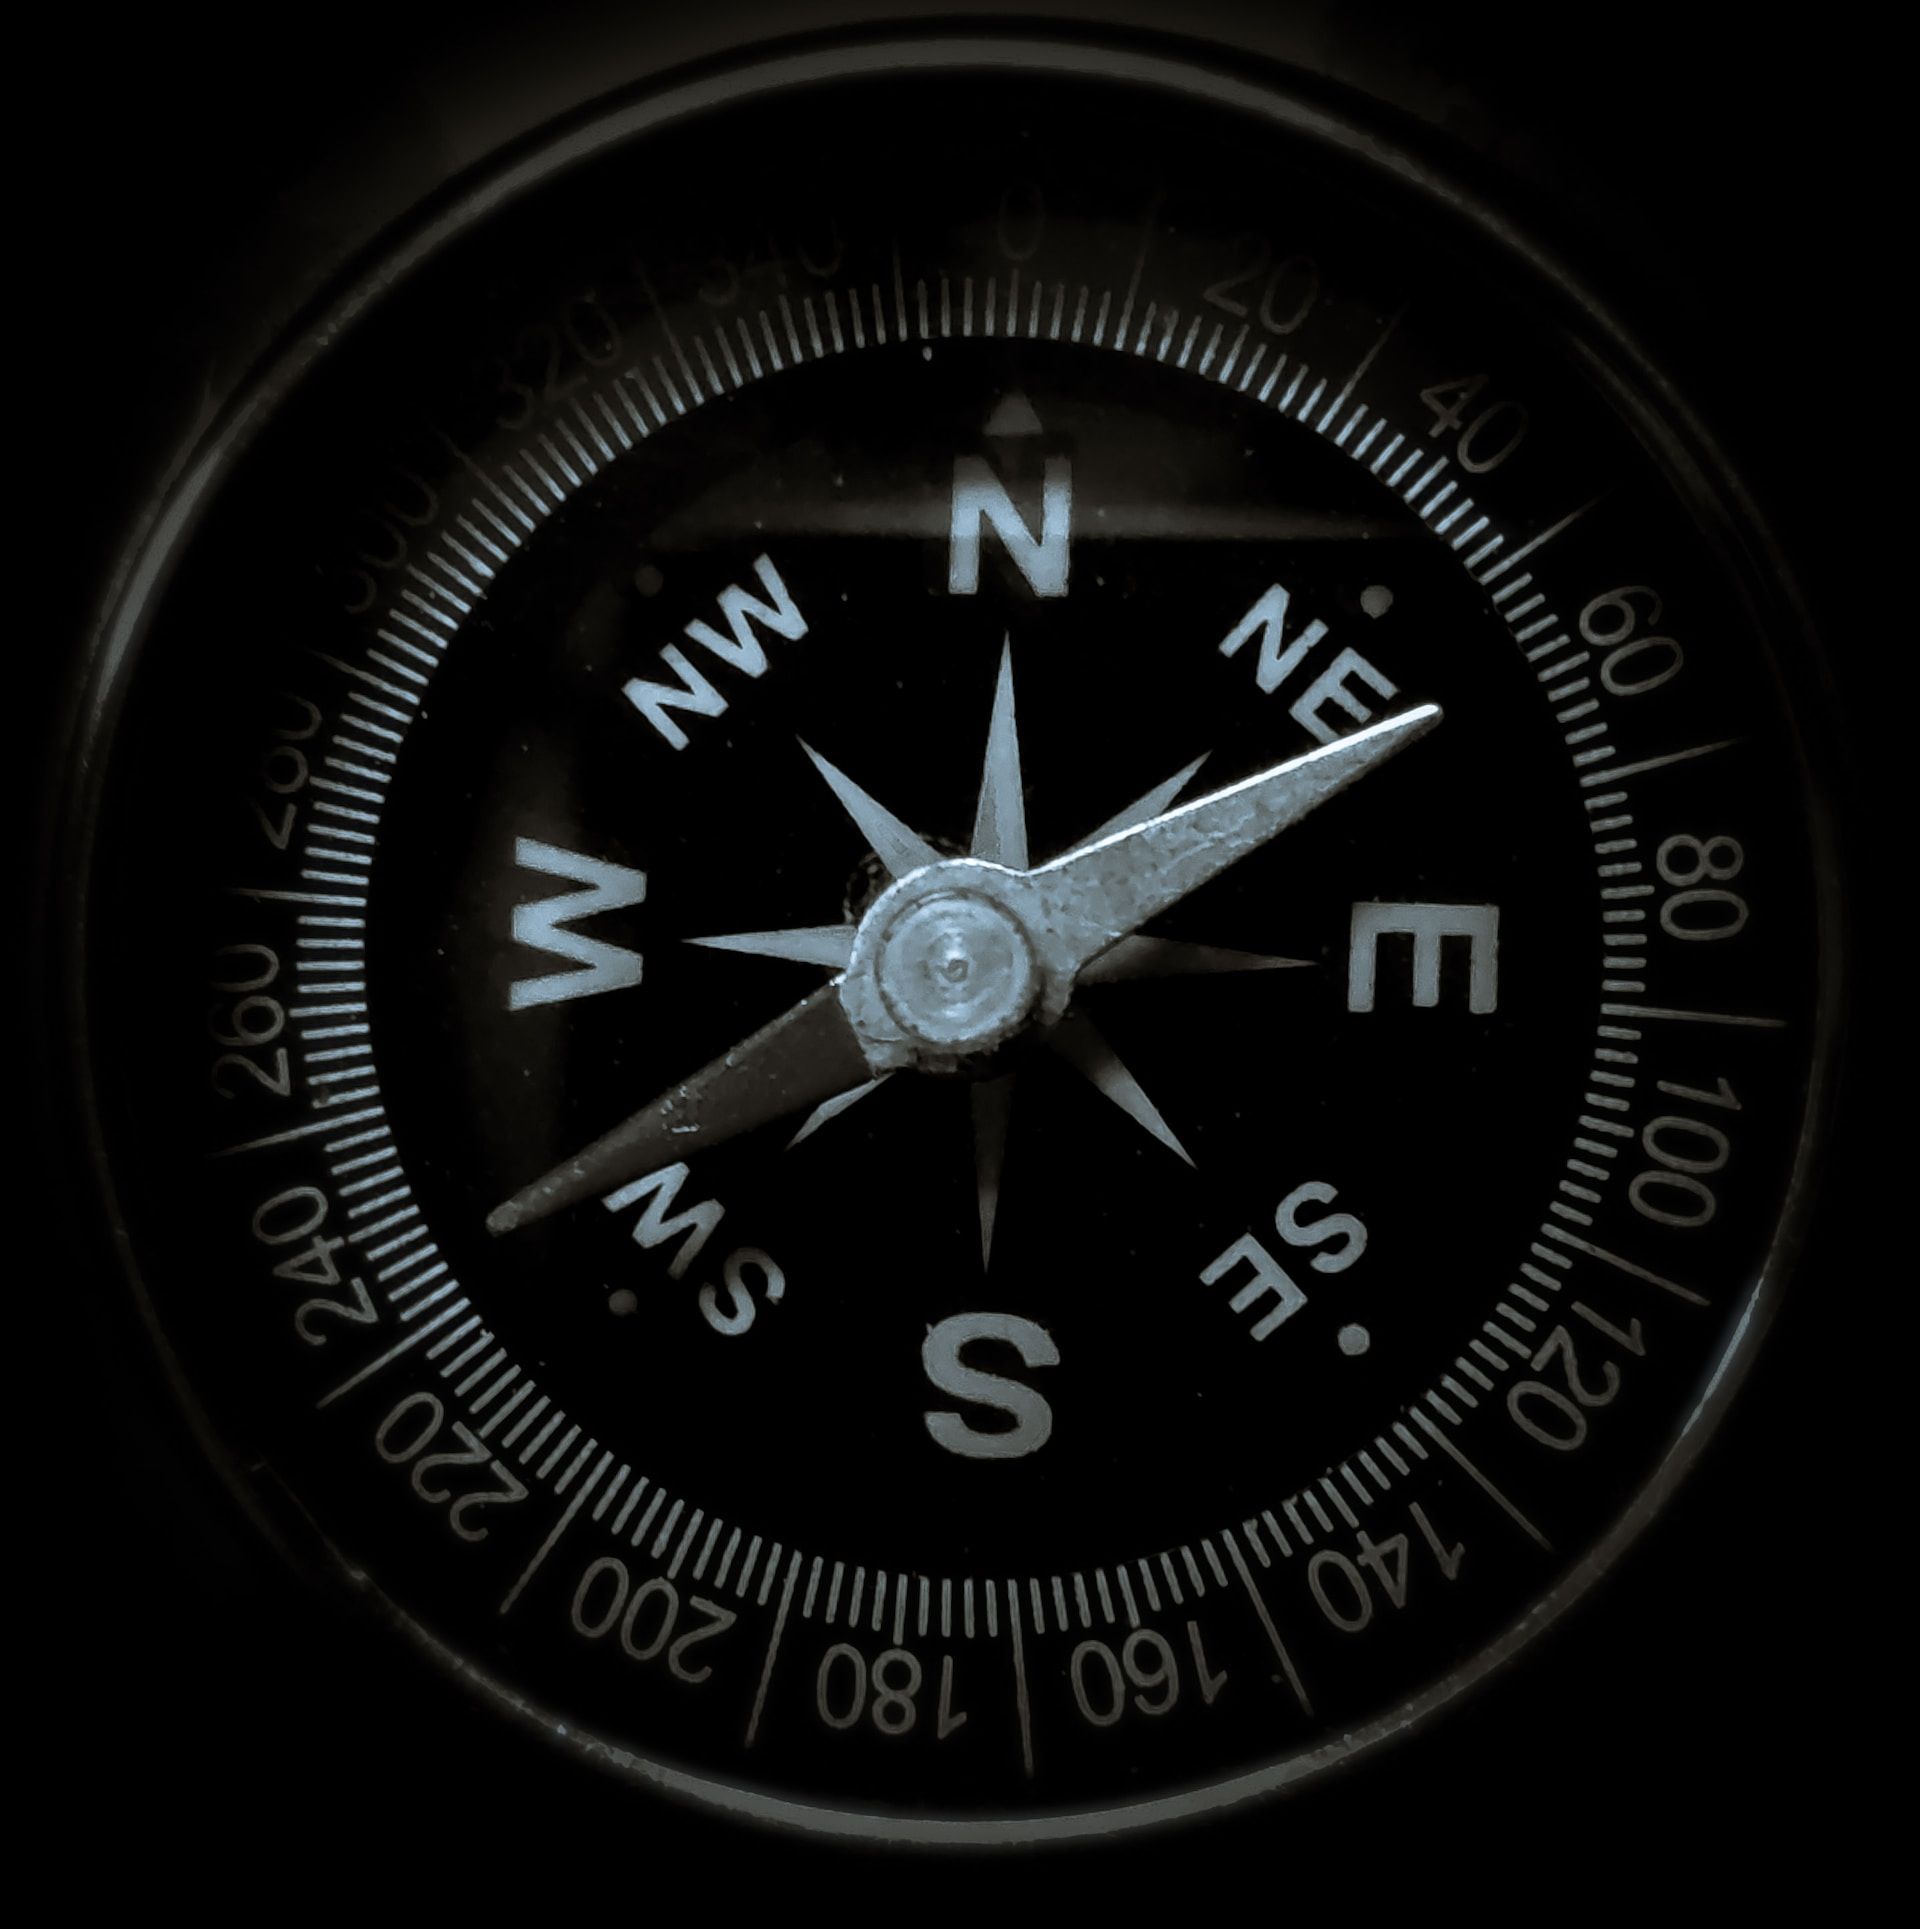 Compass indicating direction